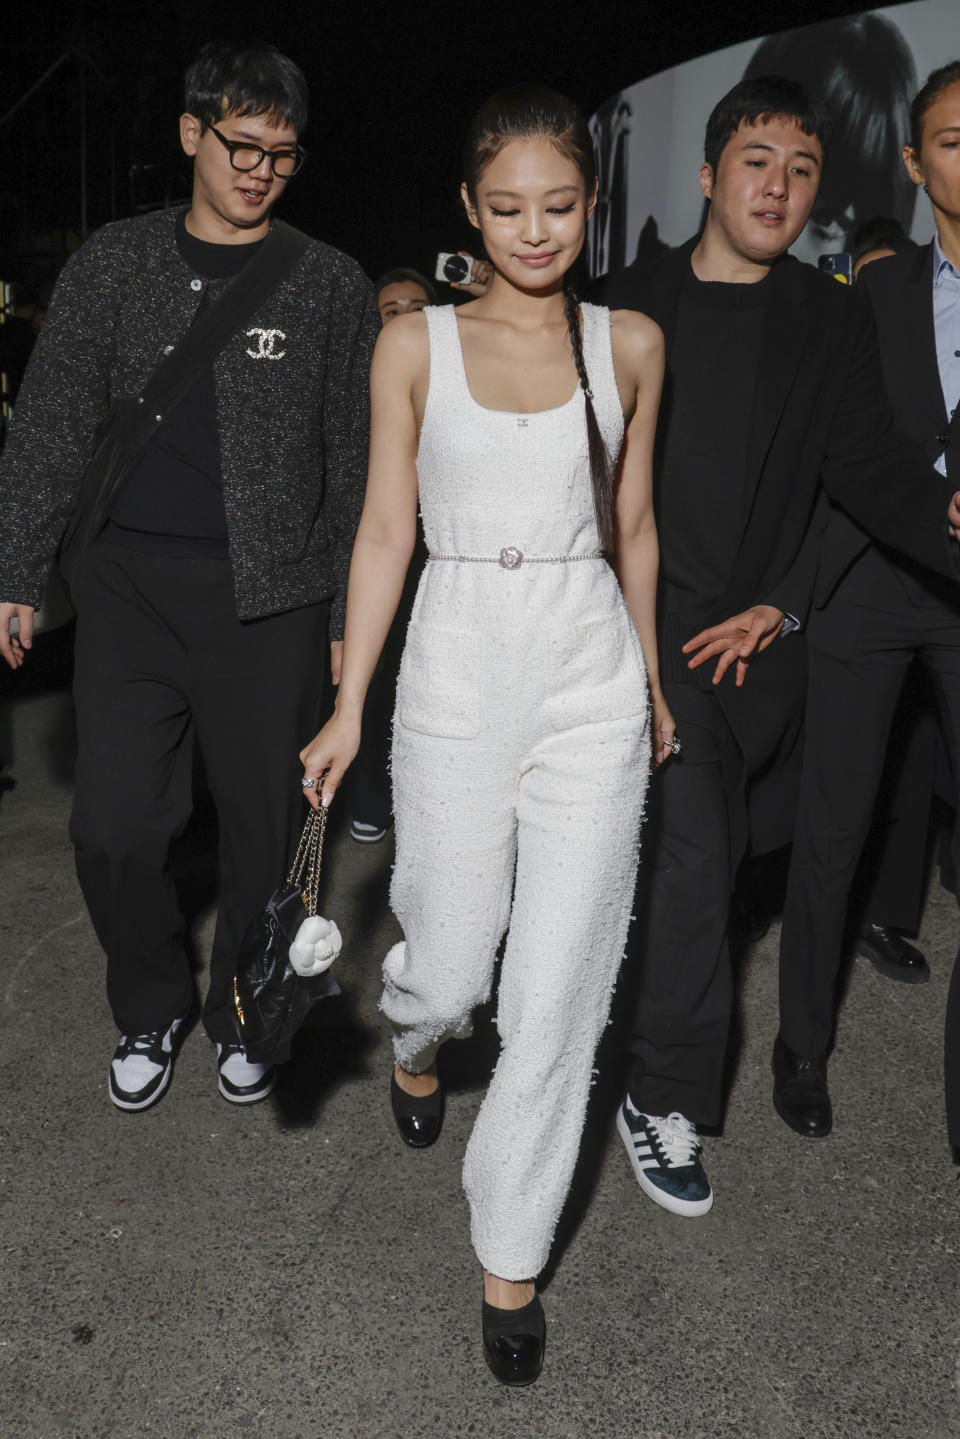 Jennie attends the Chanel Fall/Winter 2023-2024 ready-to-wear collection presented Tuesday, March 7, 2023 in Paris. (Vianney Le Caer/Invision/AP)